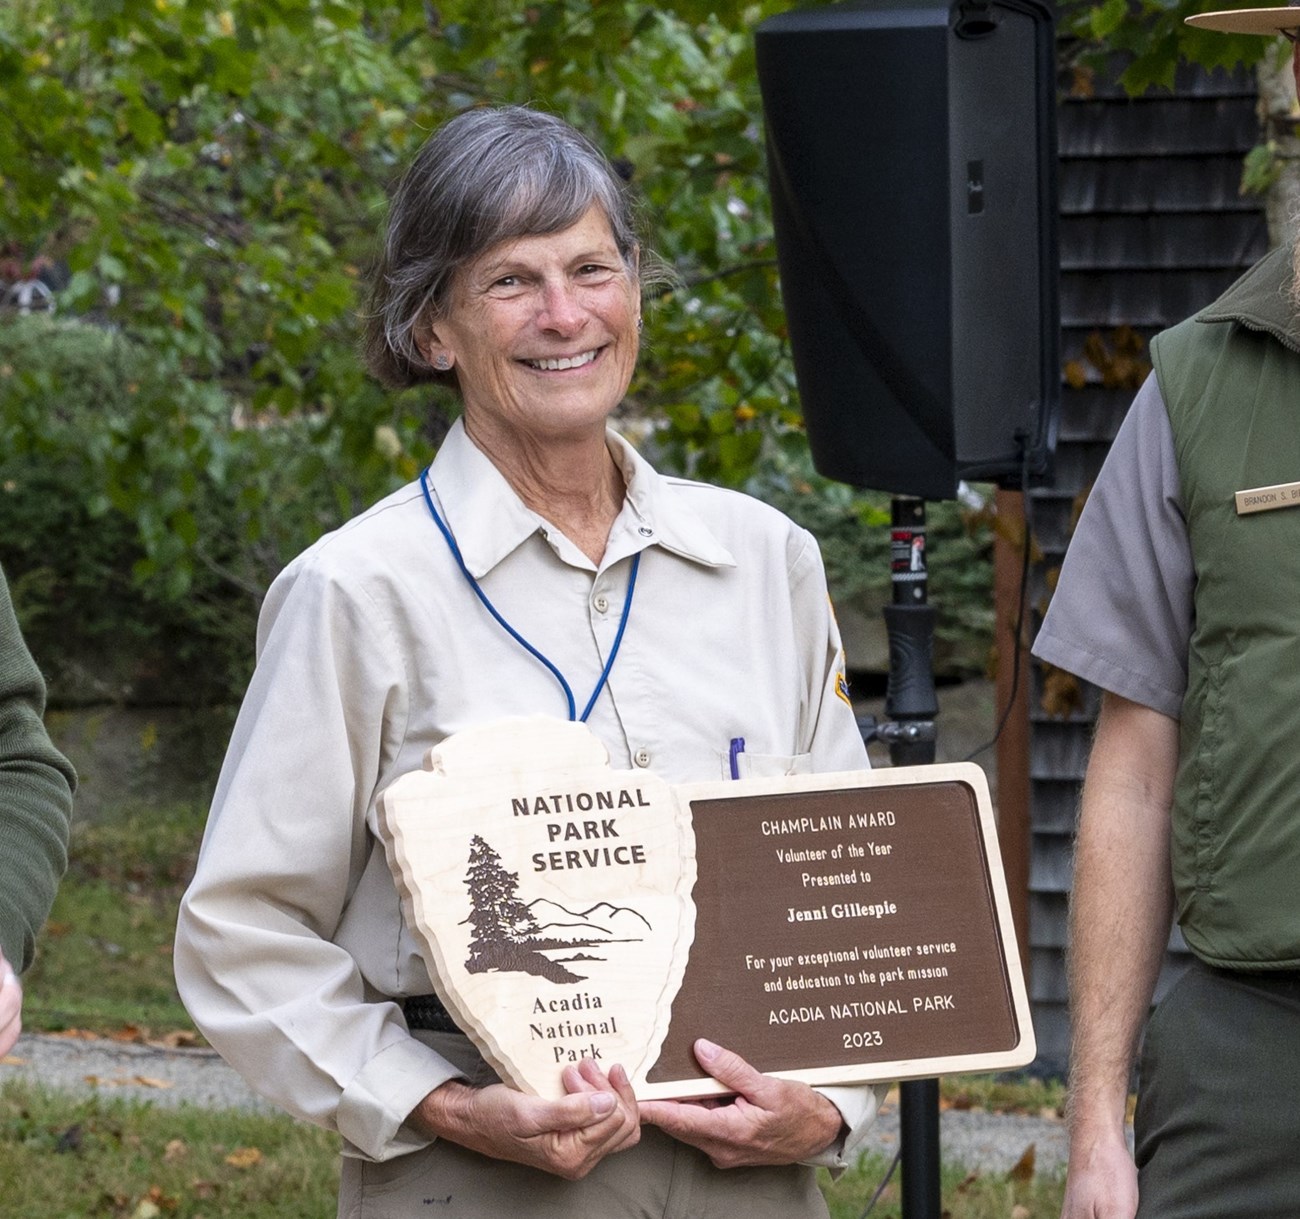 A woman with salt and pepper hair and dressed in the NPS volunteer uniform holds a wooden plaque decorated with the National Park arrowhead logo and the text "Volunteer of the Year: 2023"